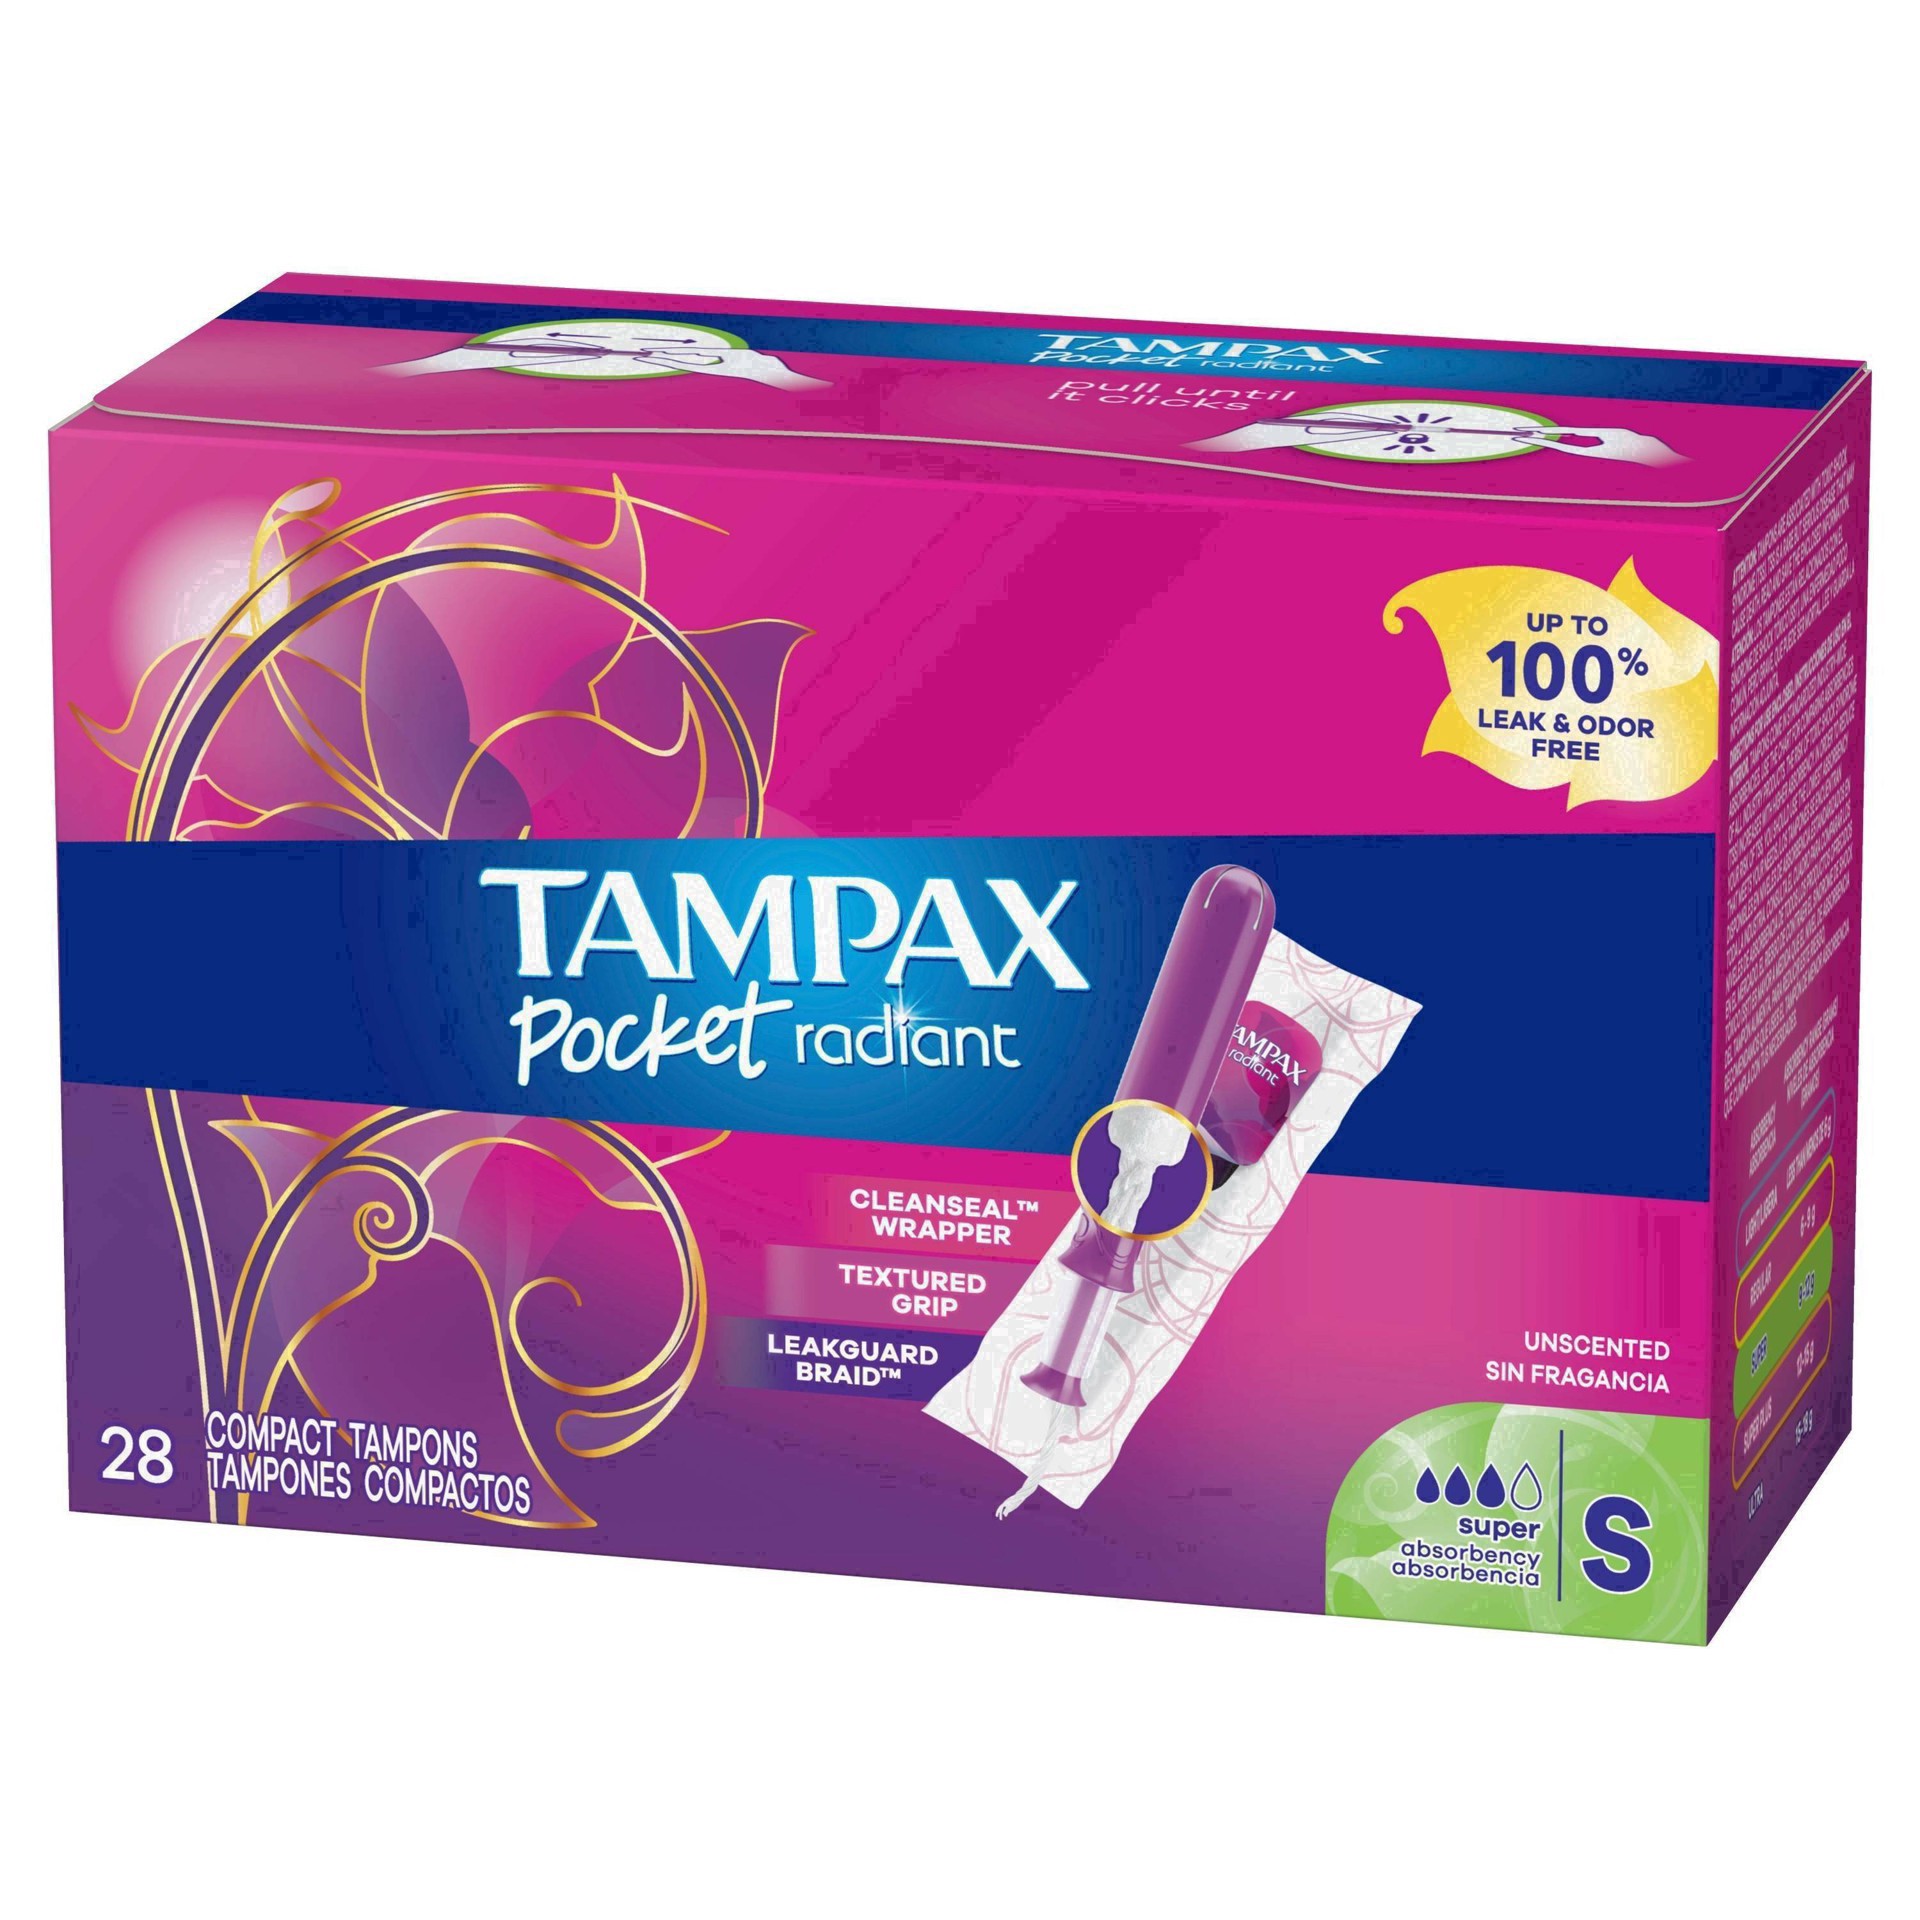 slide 75 of 94, Tampax Pocket Radiant Compact Plastic Tampons, With LeakGuard Braid, Super Absorbency, Unscented, 28 Count, 28 ct